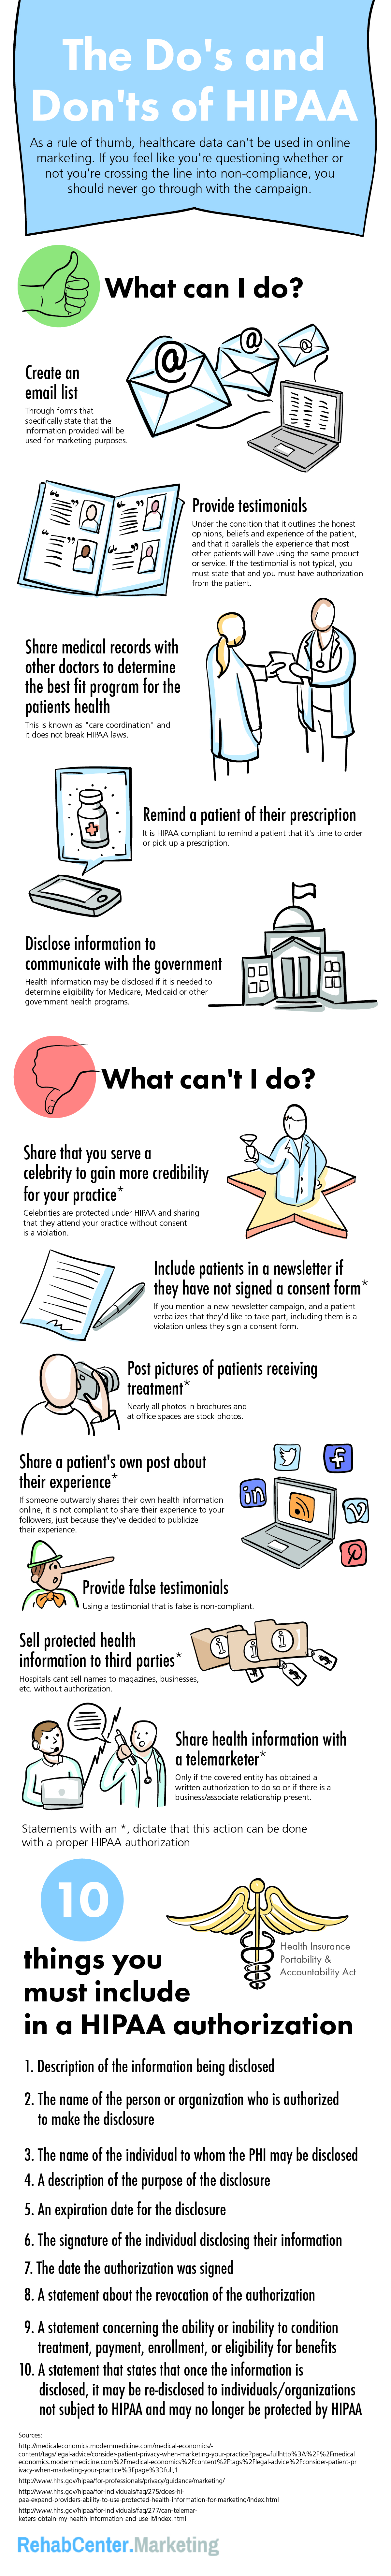 Infographic: HIPAA Do's and Don'ts